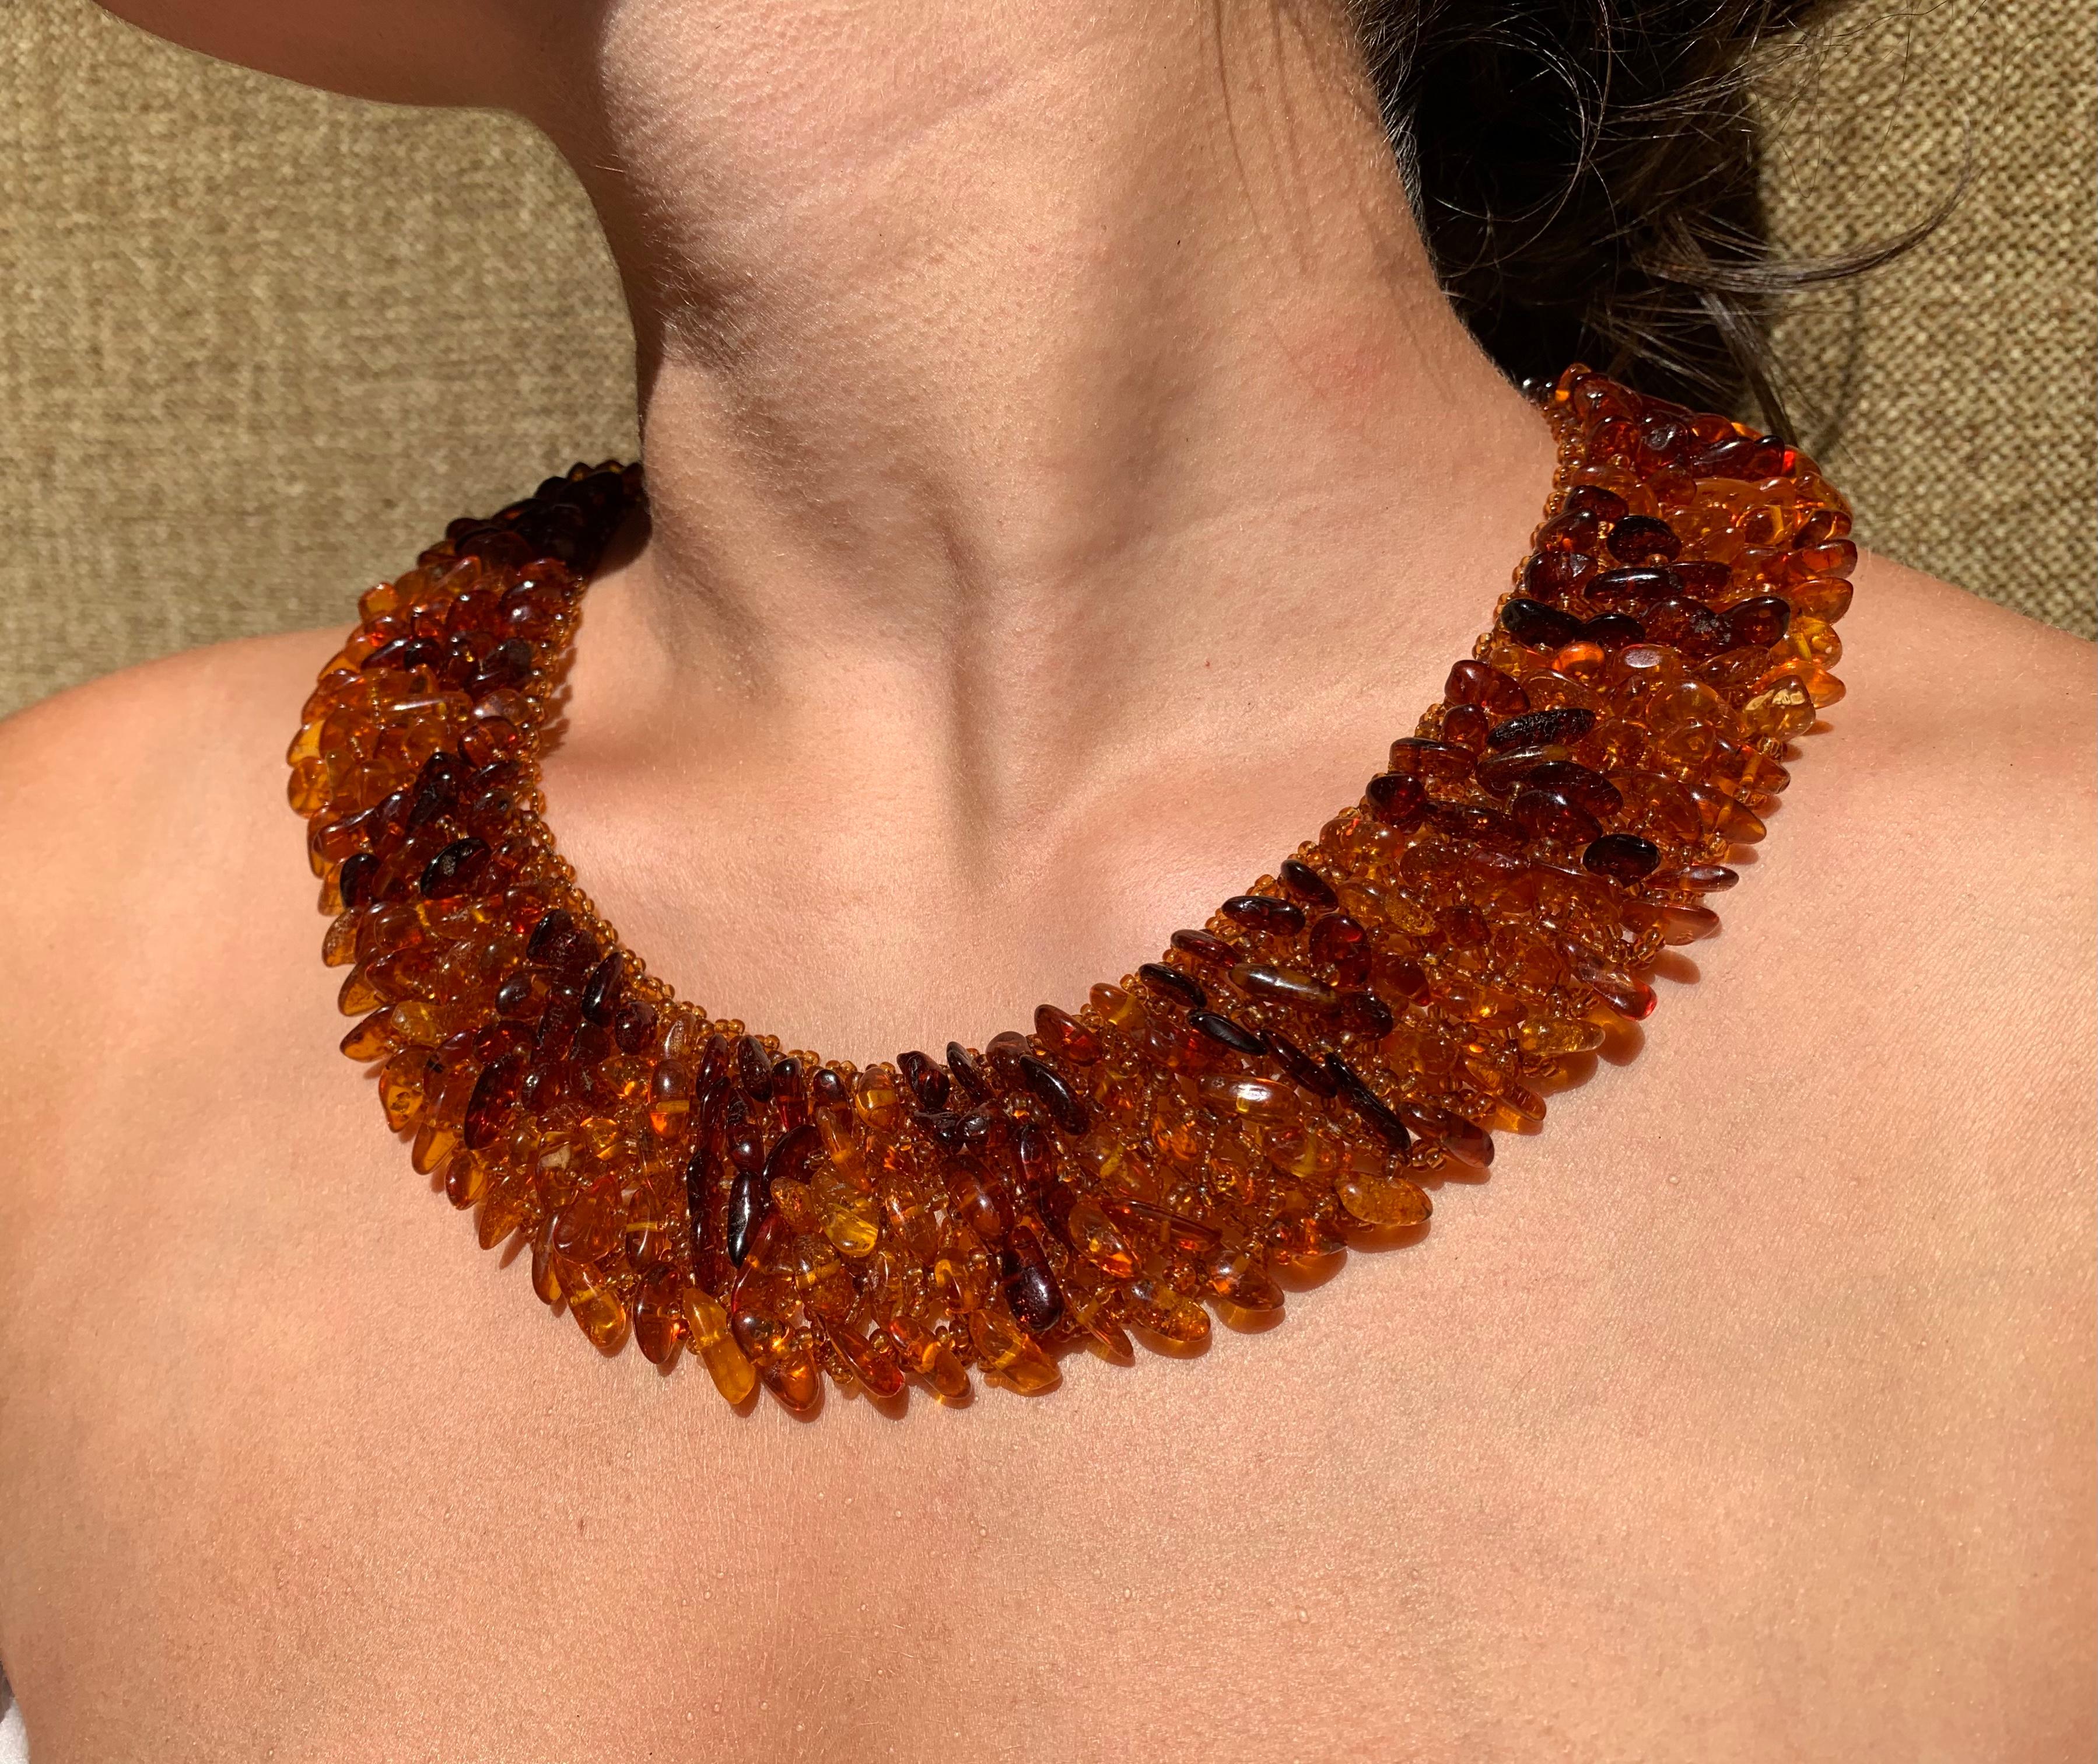 Striking wide Baltic amber necklace composed of natural tumbled amber artfully mounted on an amber colored glass bead setting, 14k gold filigree clasp.
Hand made, fabulous scale - 1.5 